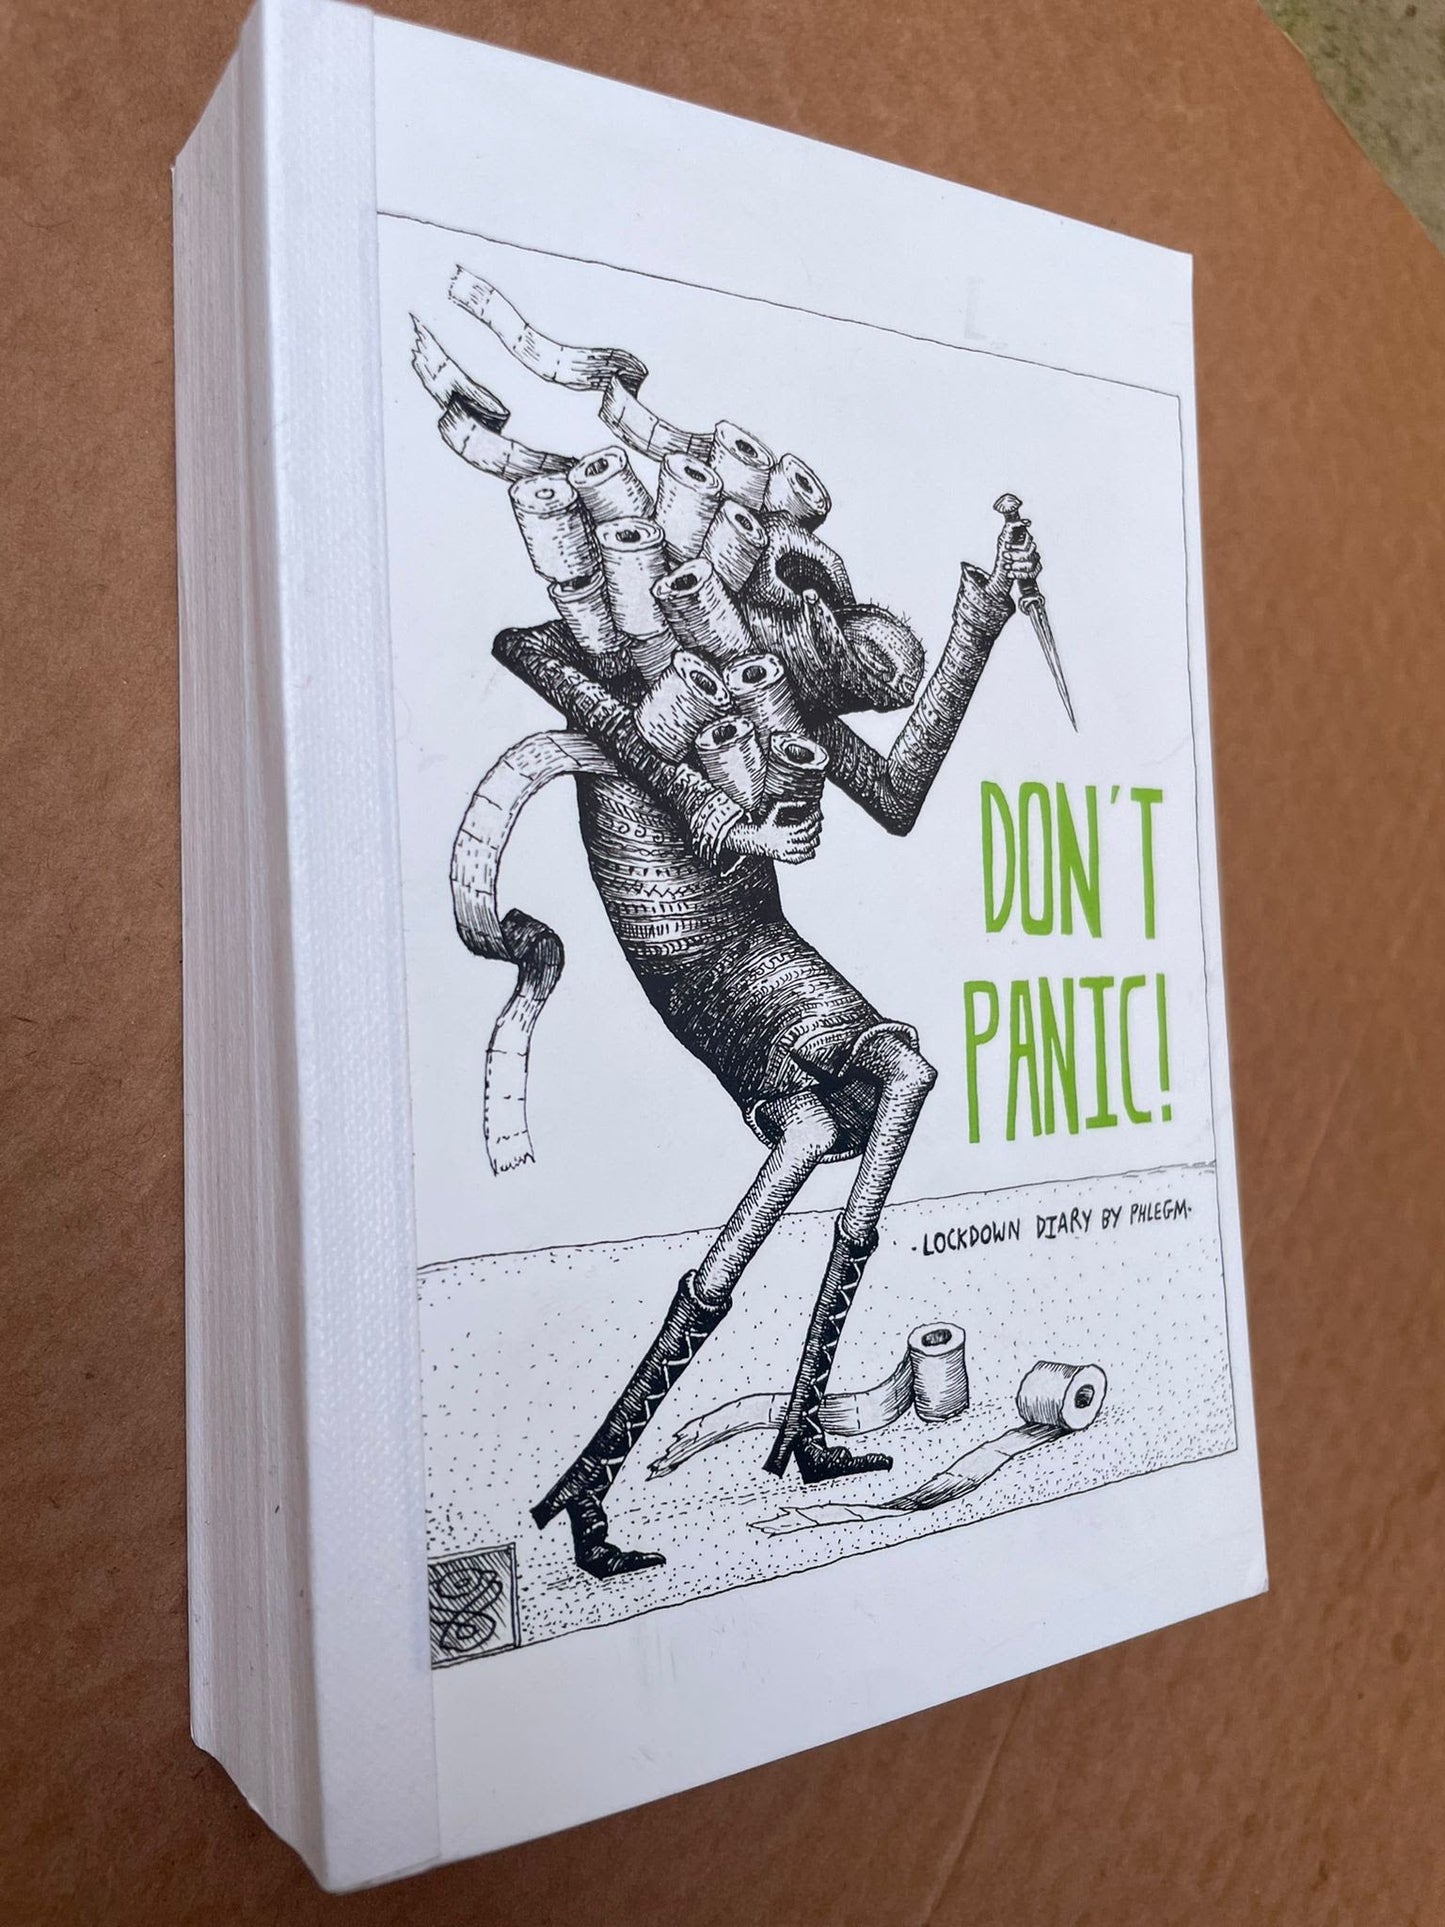 Don't Panic! - Book (UK ONLY)